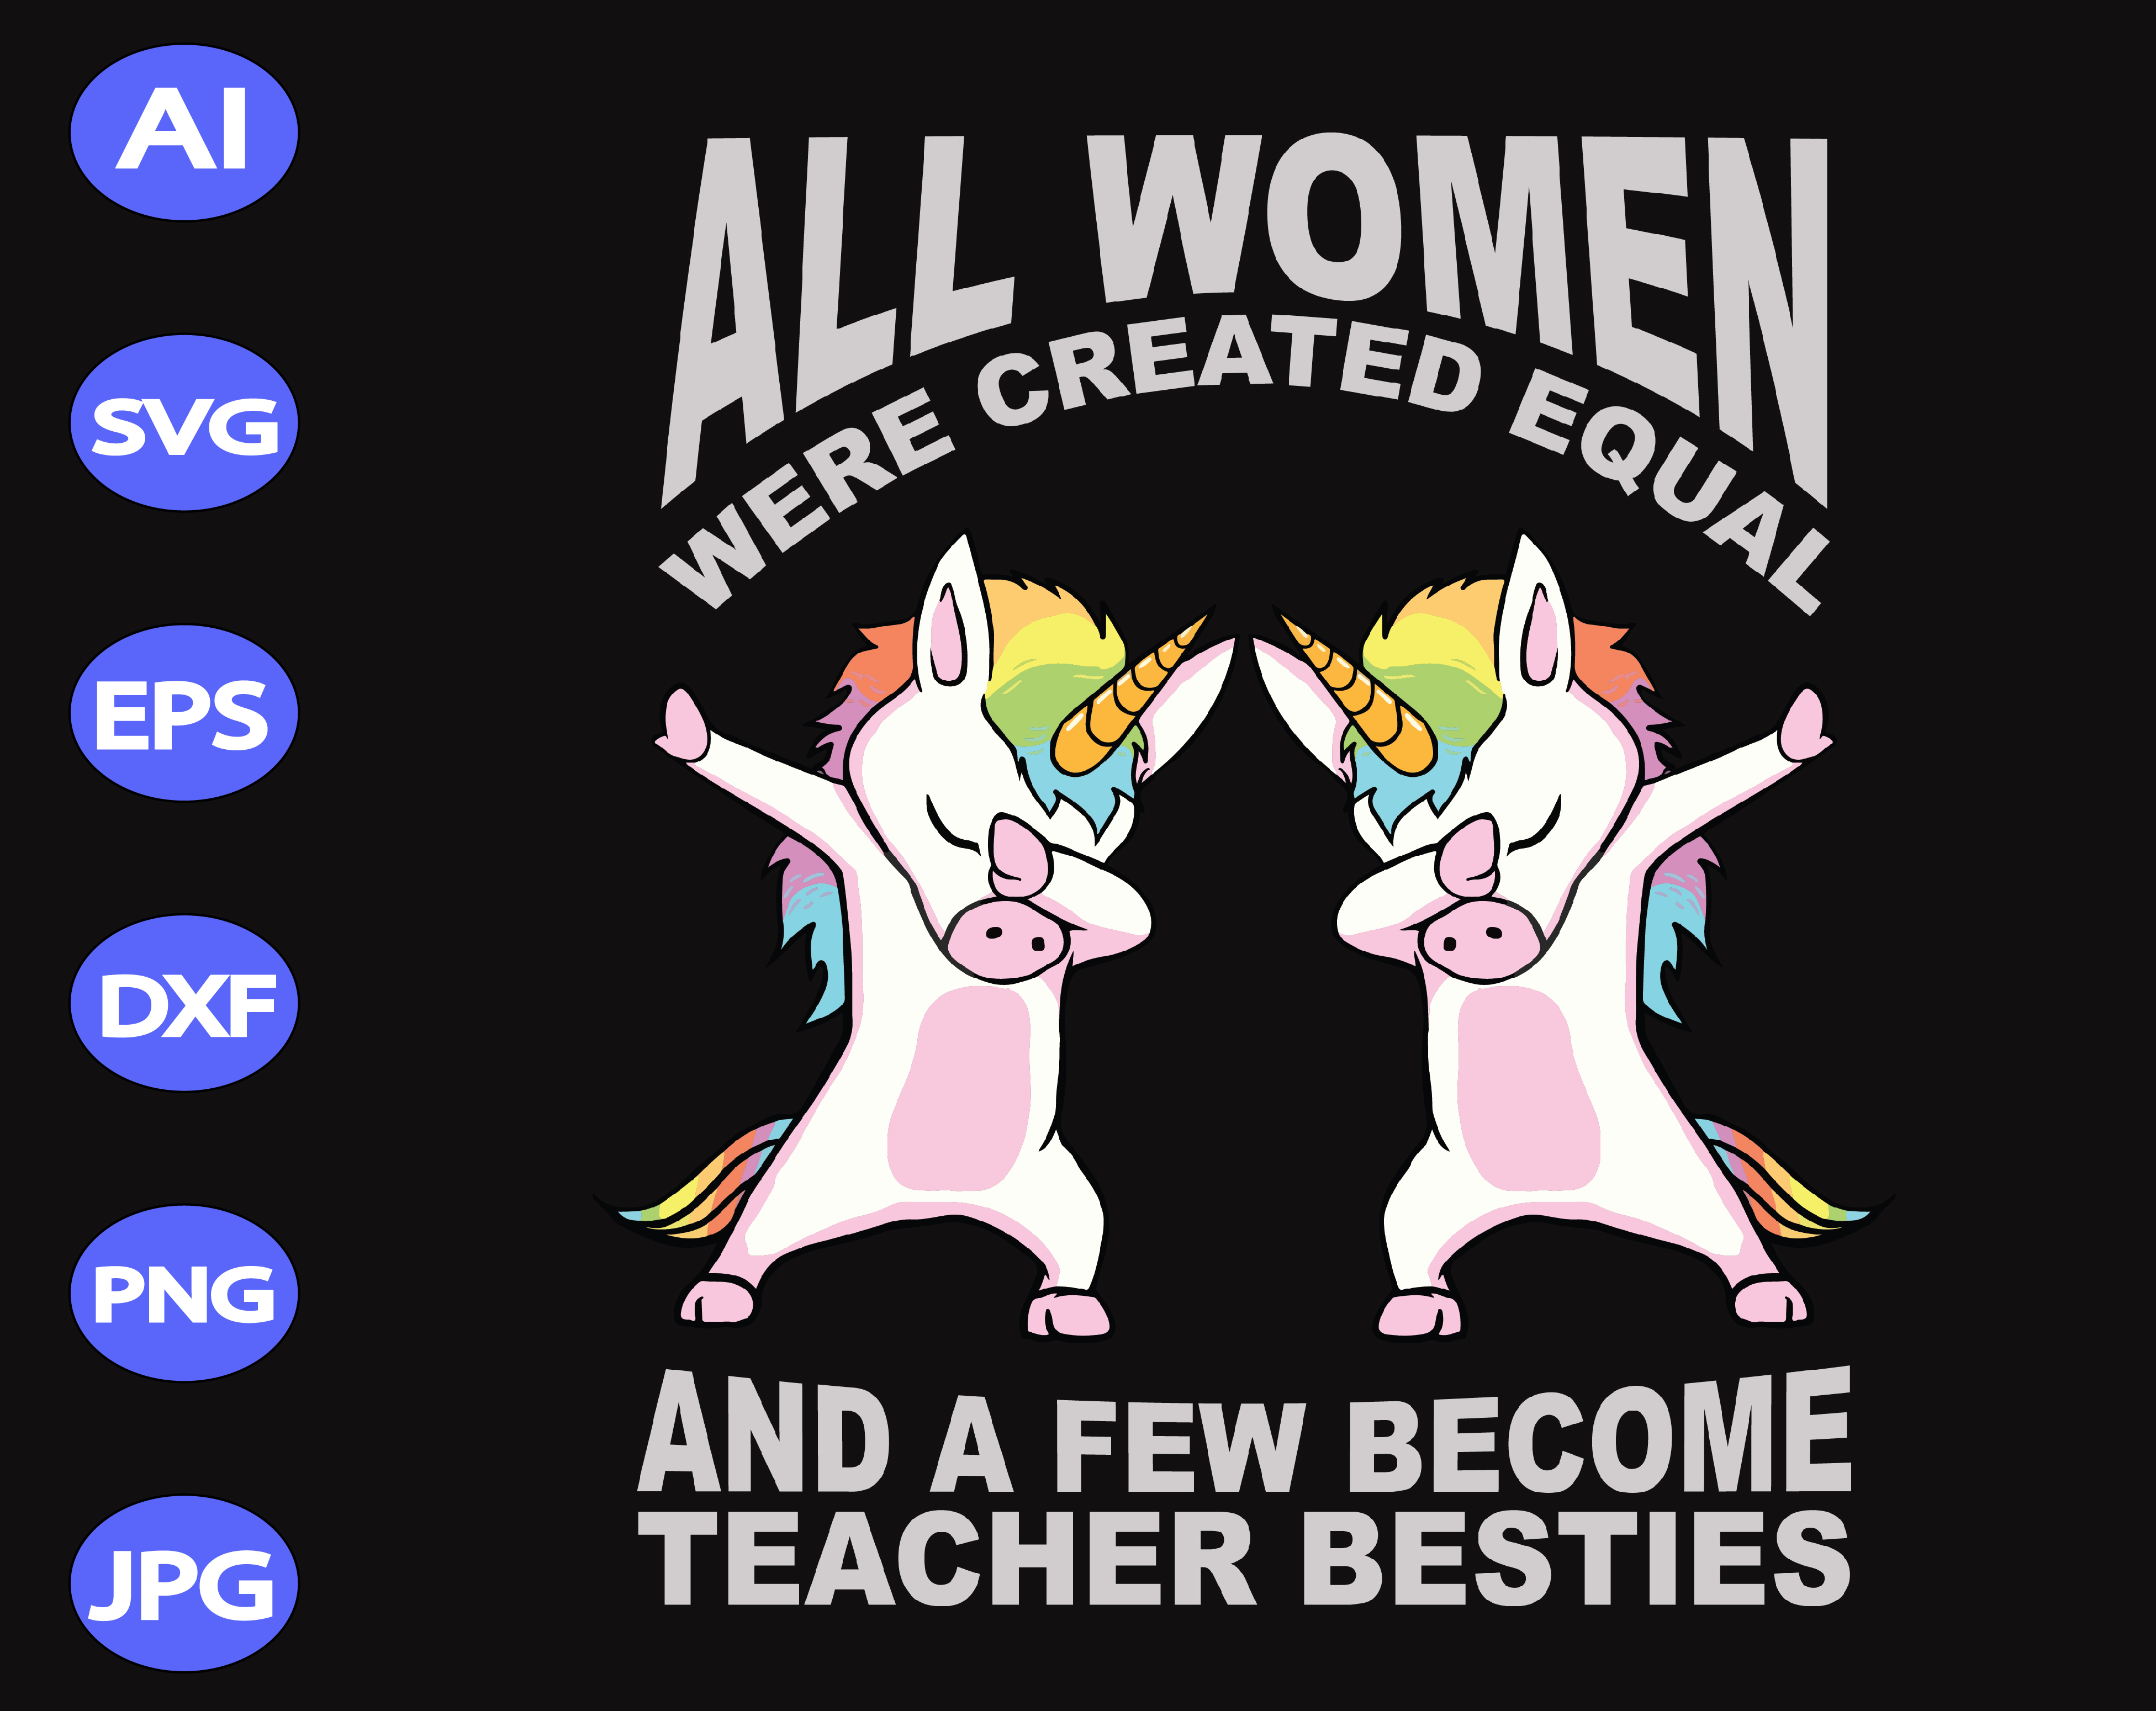 Download All Women Were Created Equal And A Few Become Teacher Besties Svg Dxf Eps Png Digital Download Designbtf Com